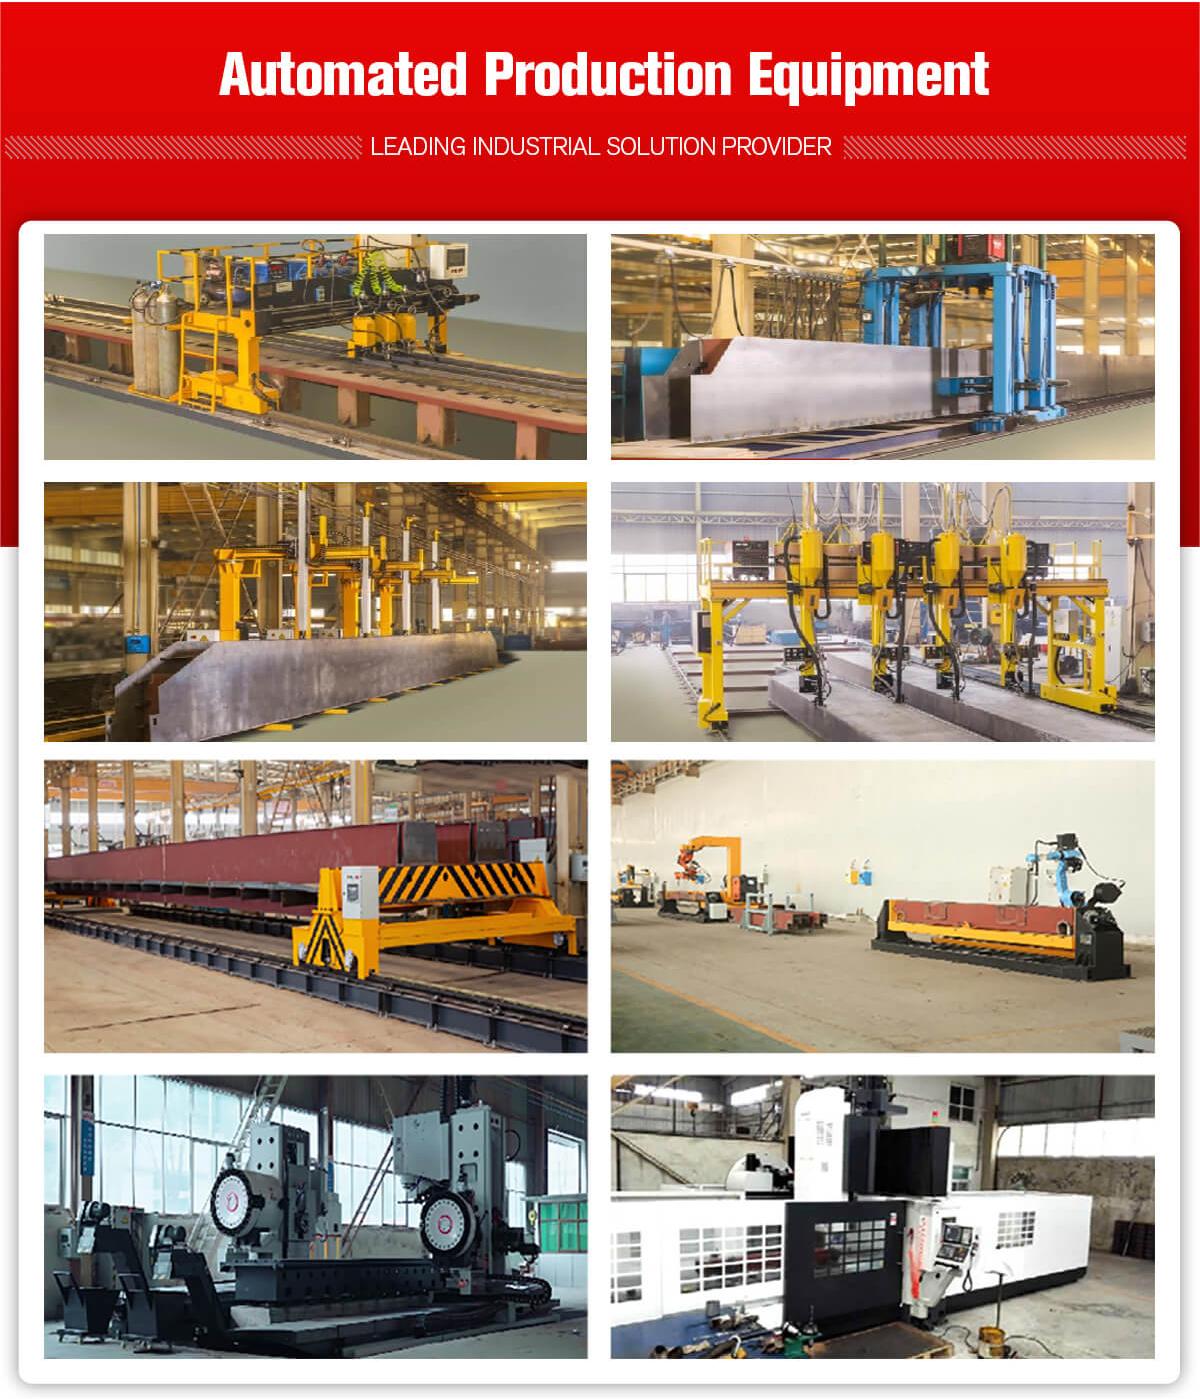 Automated Production Equipment